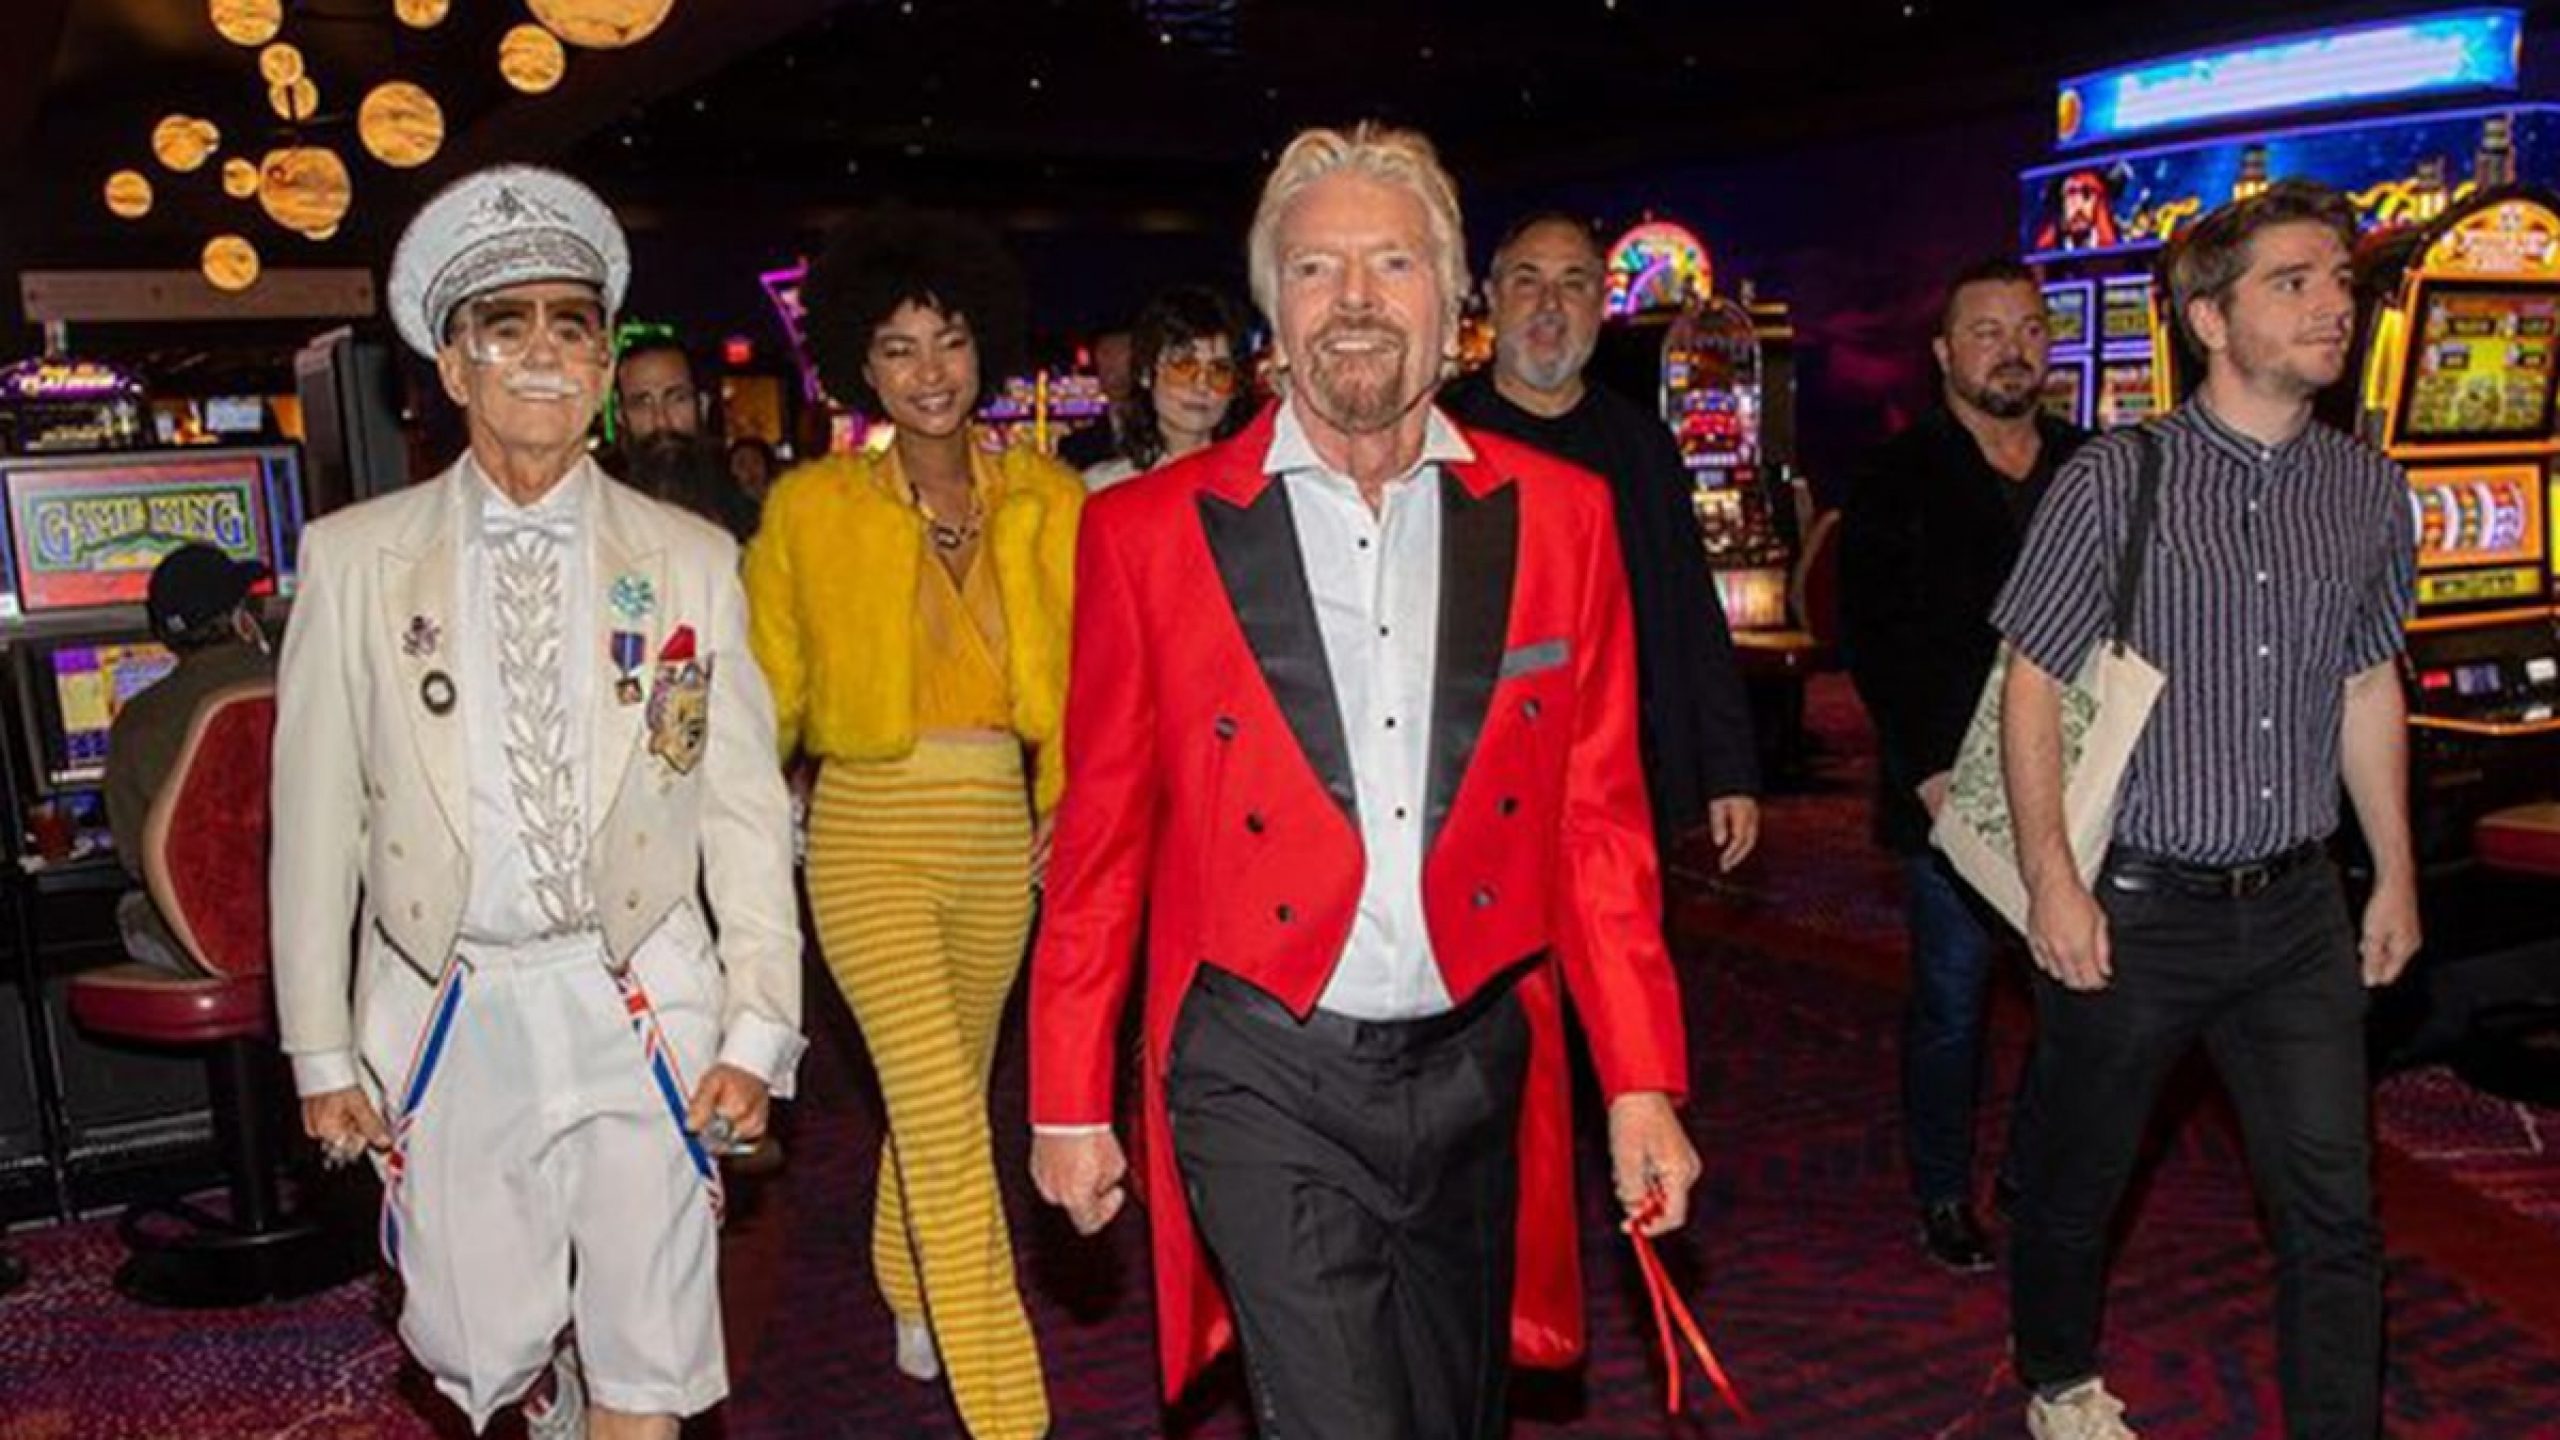 Richard Branson Not Focused on Space Trip, All About Vegas Hotel Opening